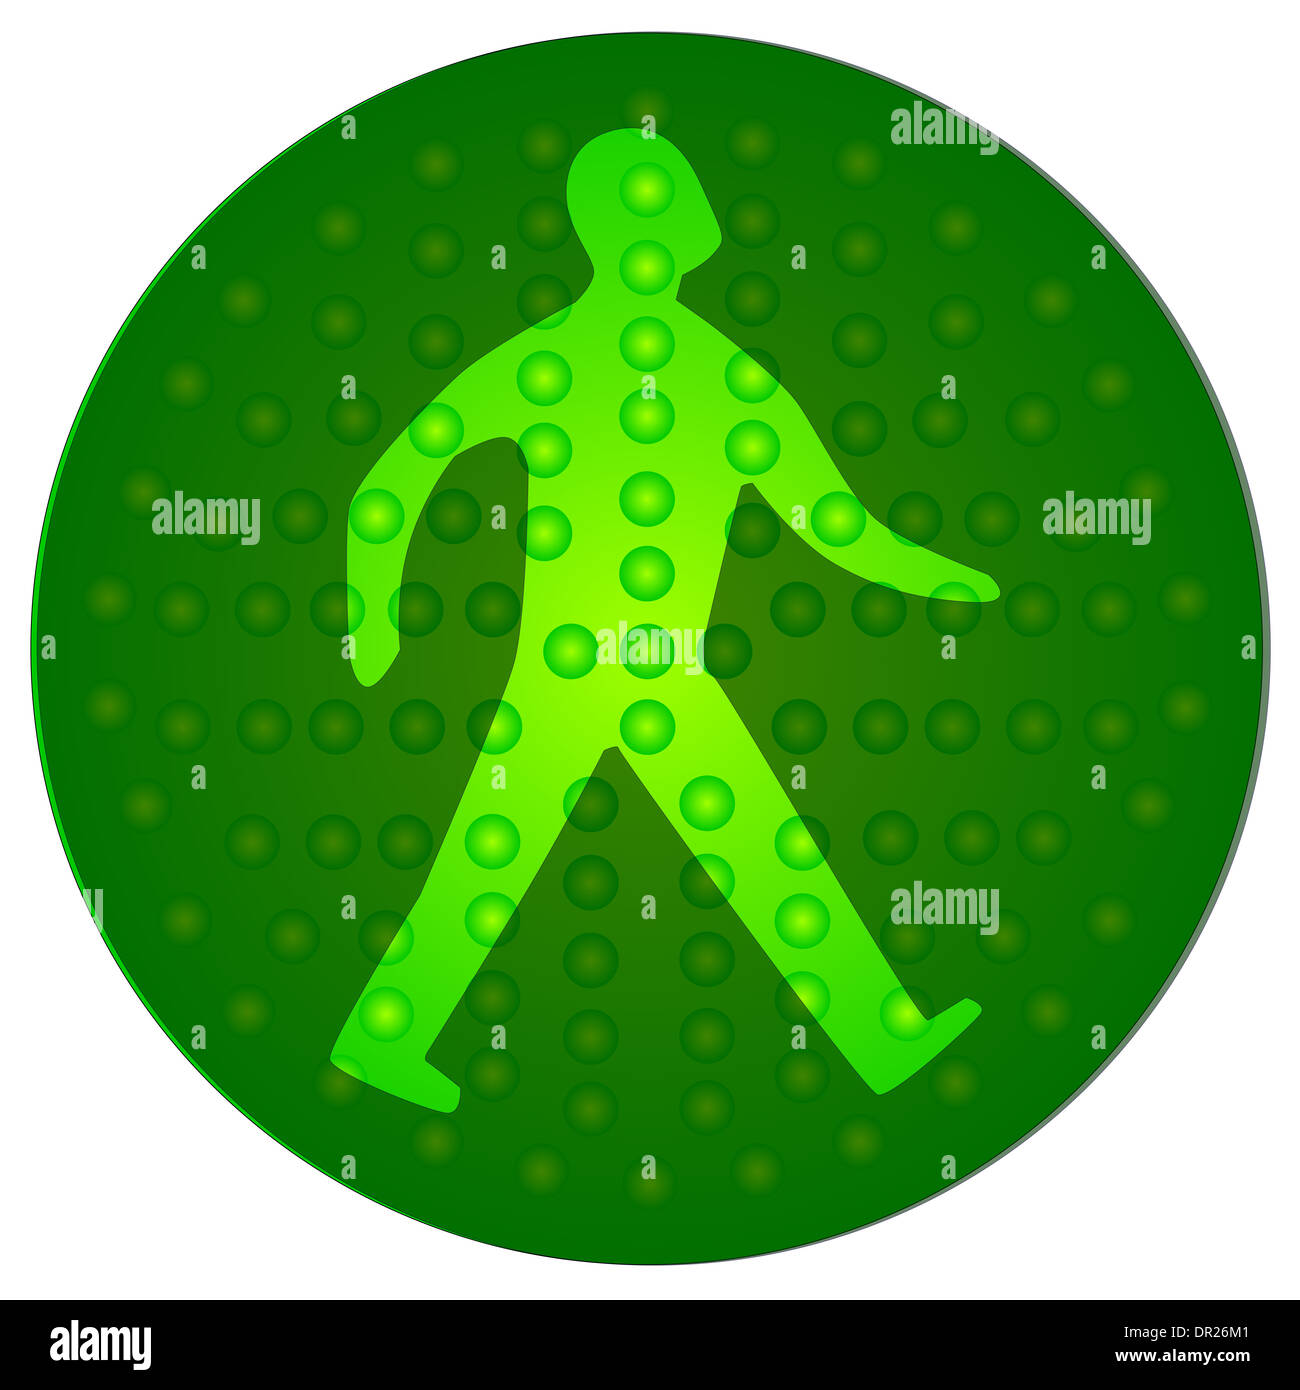 The green walking man from the traffic signal Stock Photo